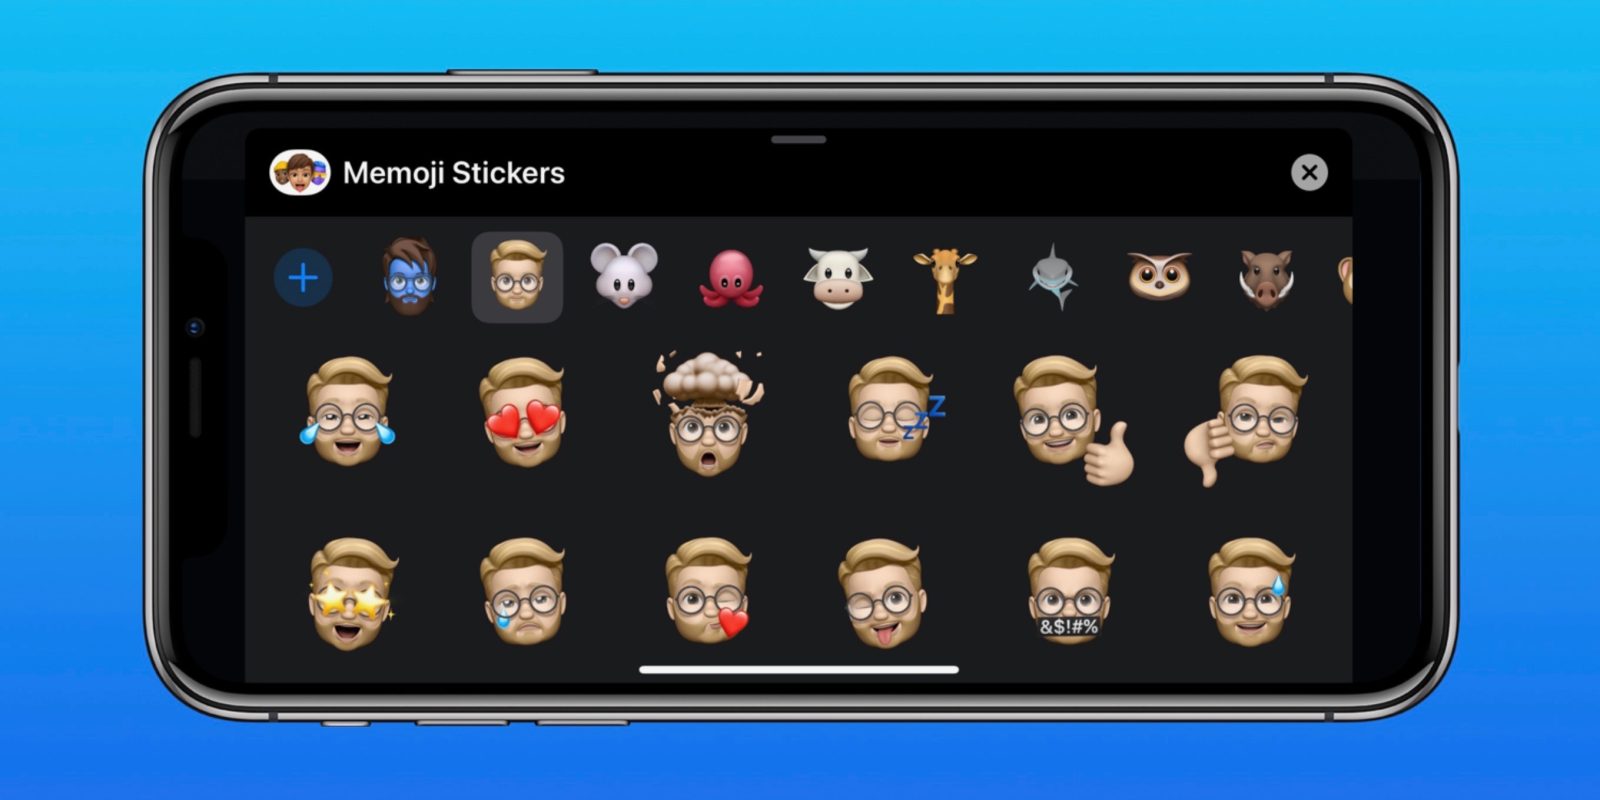 How to use Memoij Stickers on iPhone in iOS 13 - 9to5Mac